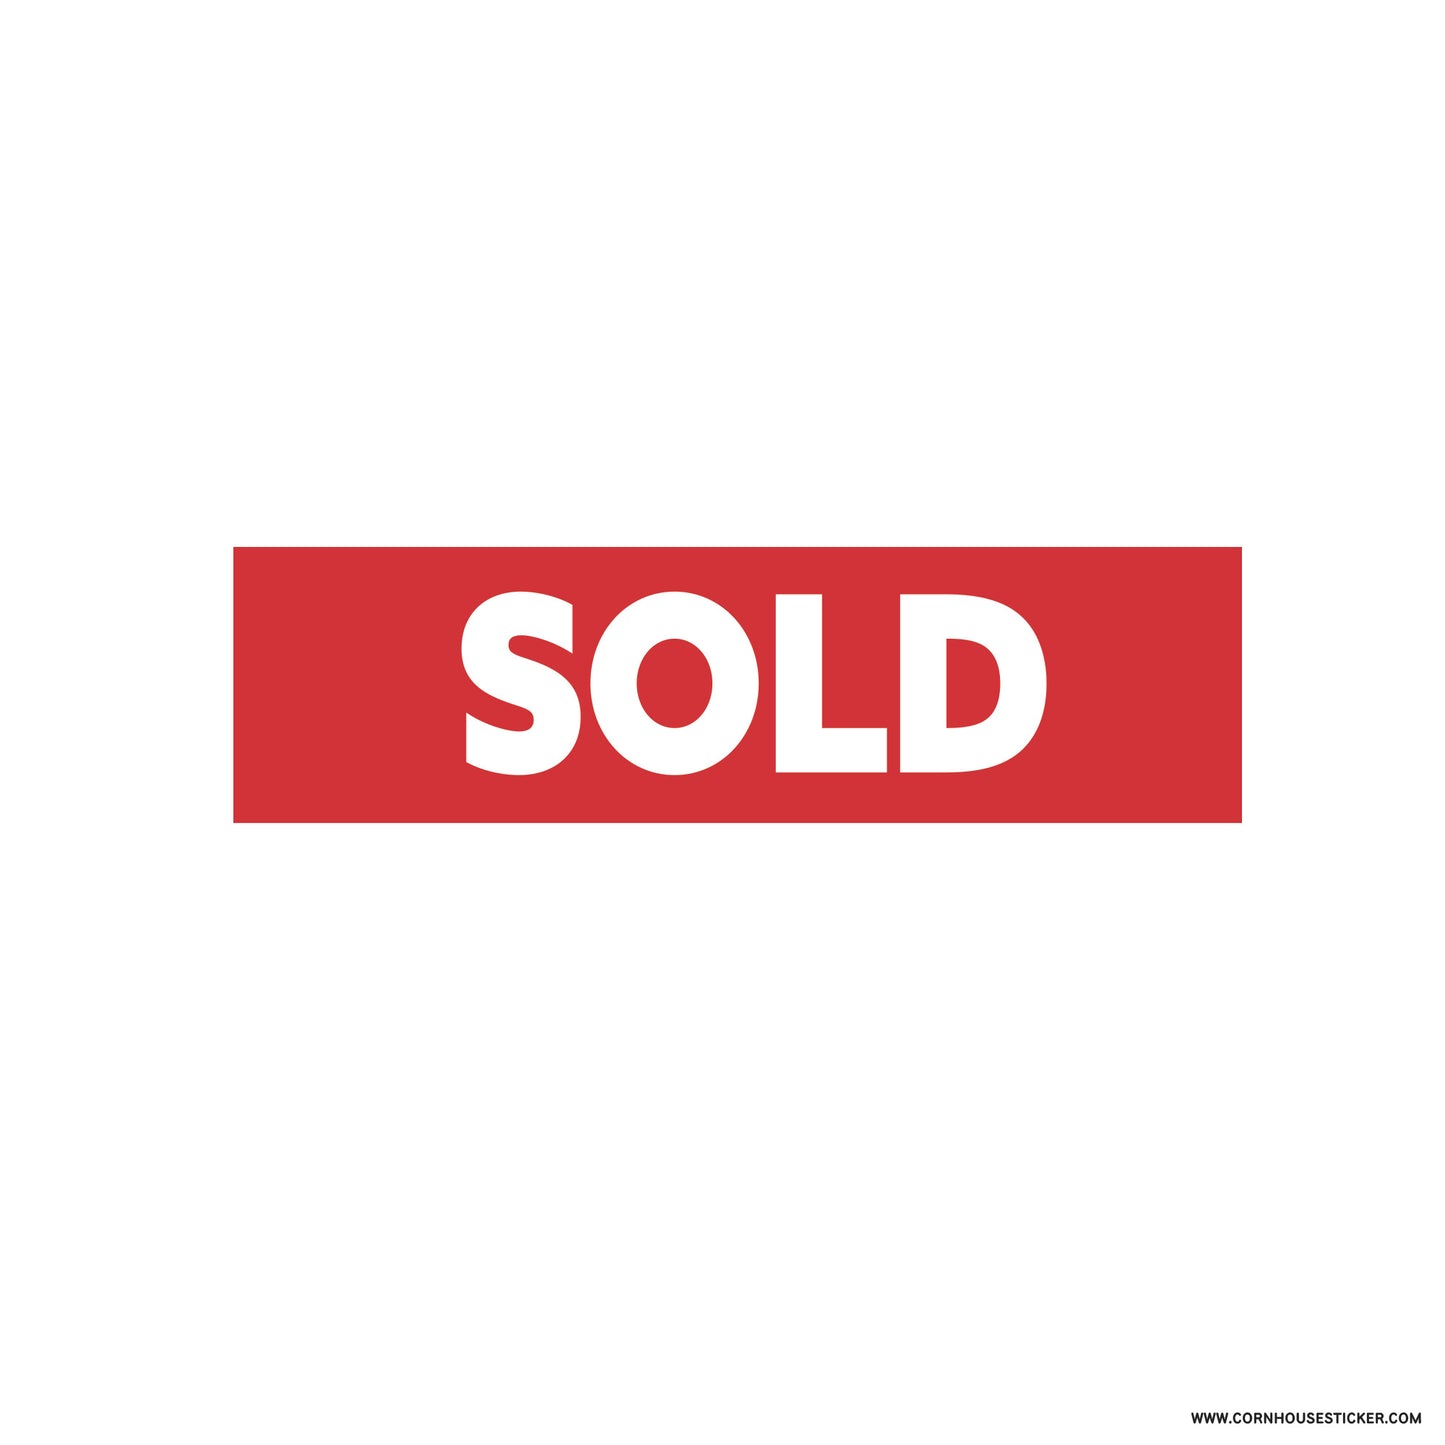 SOLD Real Estate stickers